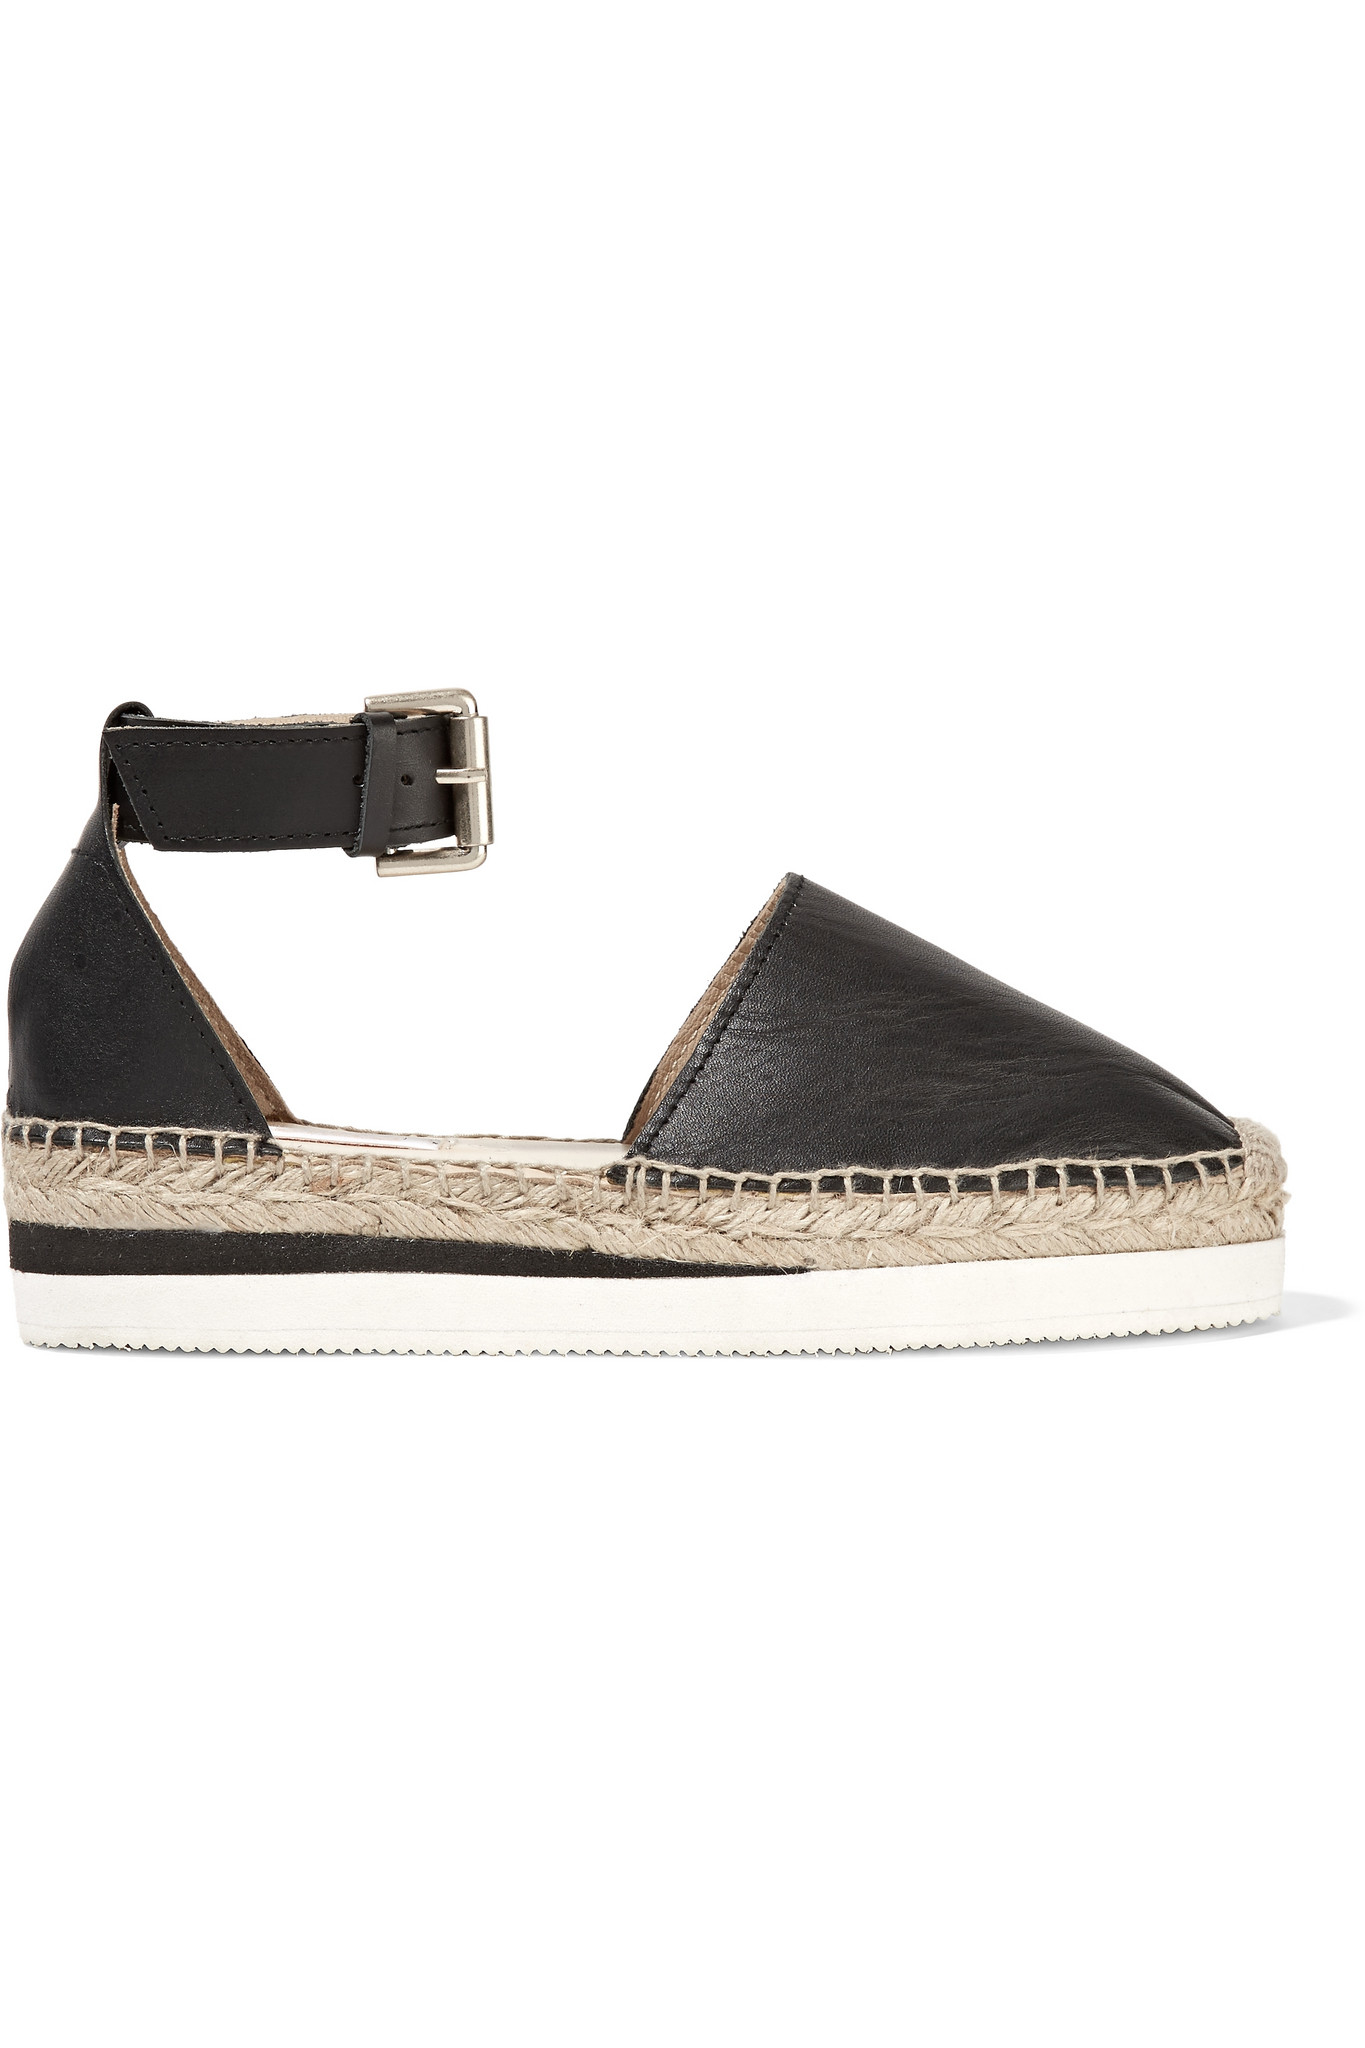 See By Chloé Leather Glyn Espadrille Wedge Sandals in Nero (Black) | Lyst